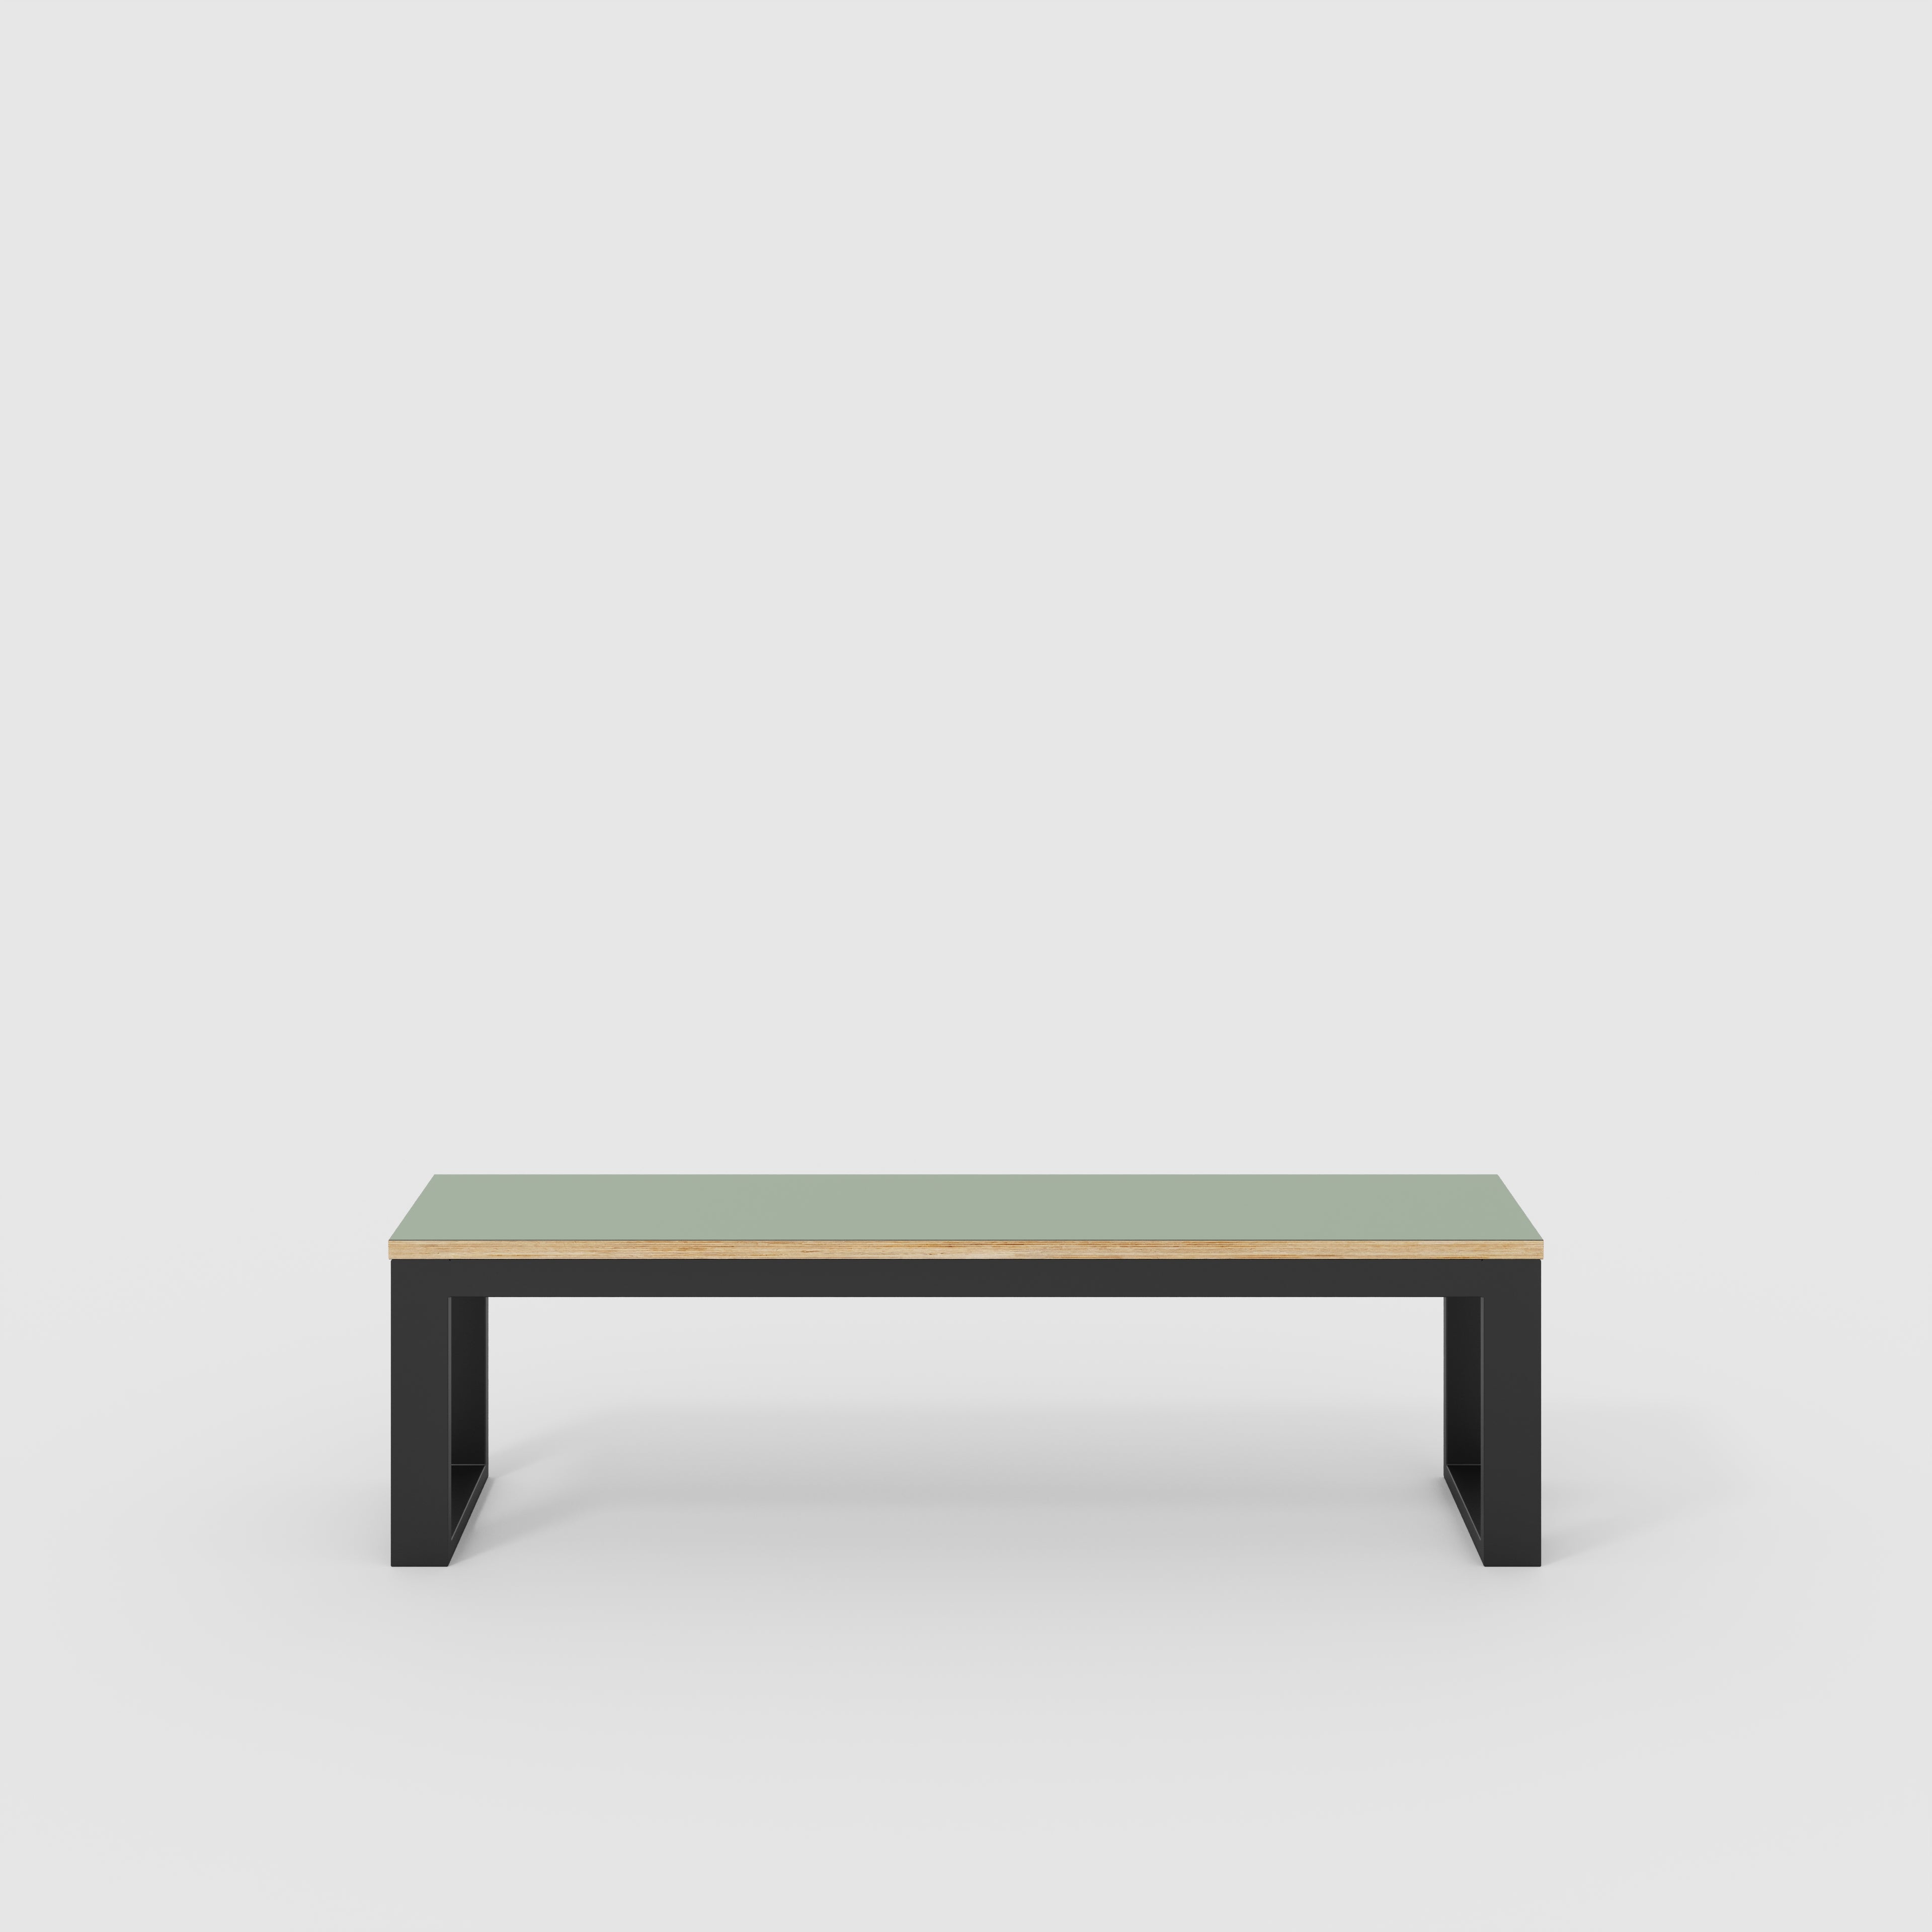 Bench Seat with Black Industrial Frame - Formica Green Slate - 1500(w) x 325(d)